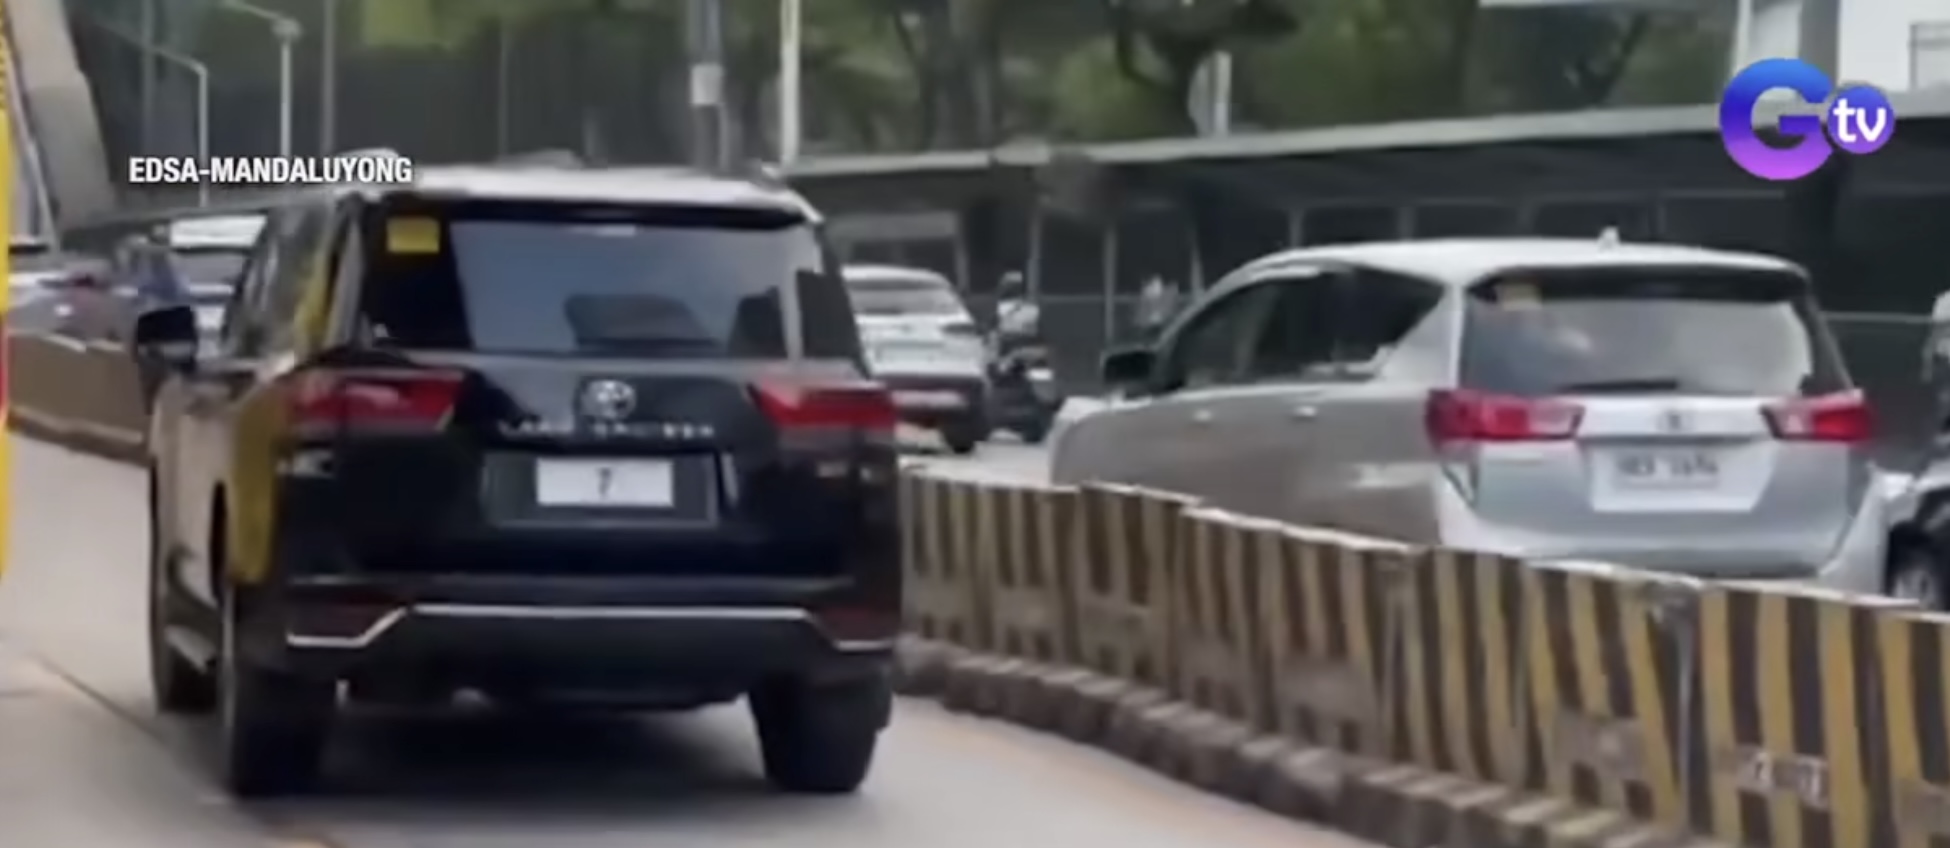 chiz escudero sorry after vehicle with his protocol plate caught on edsa busway